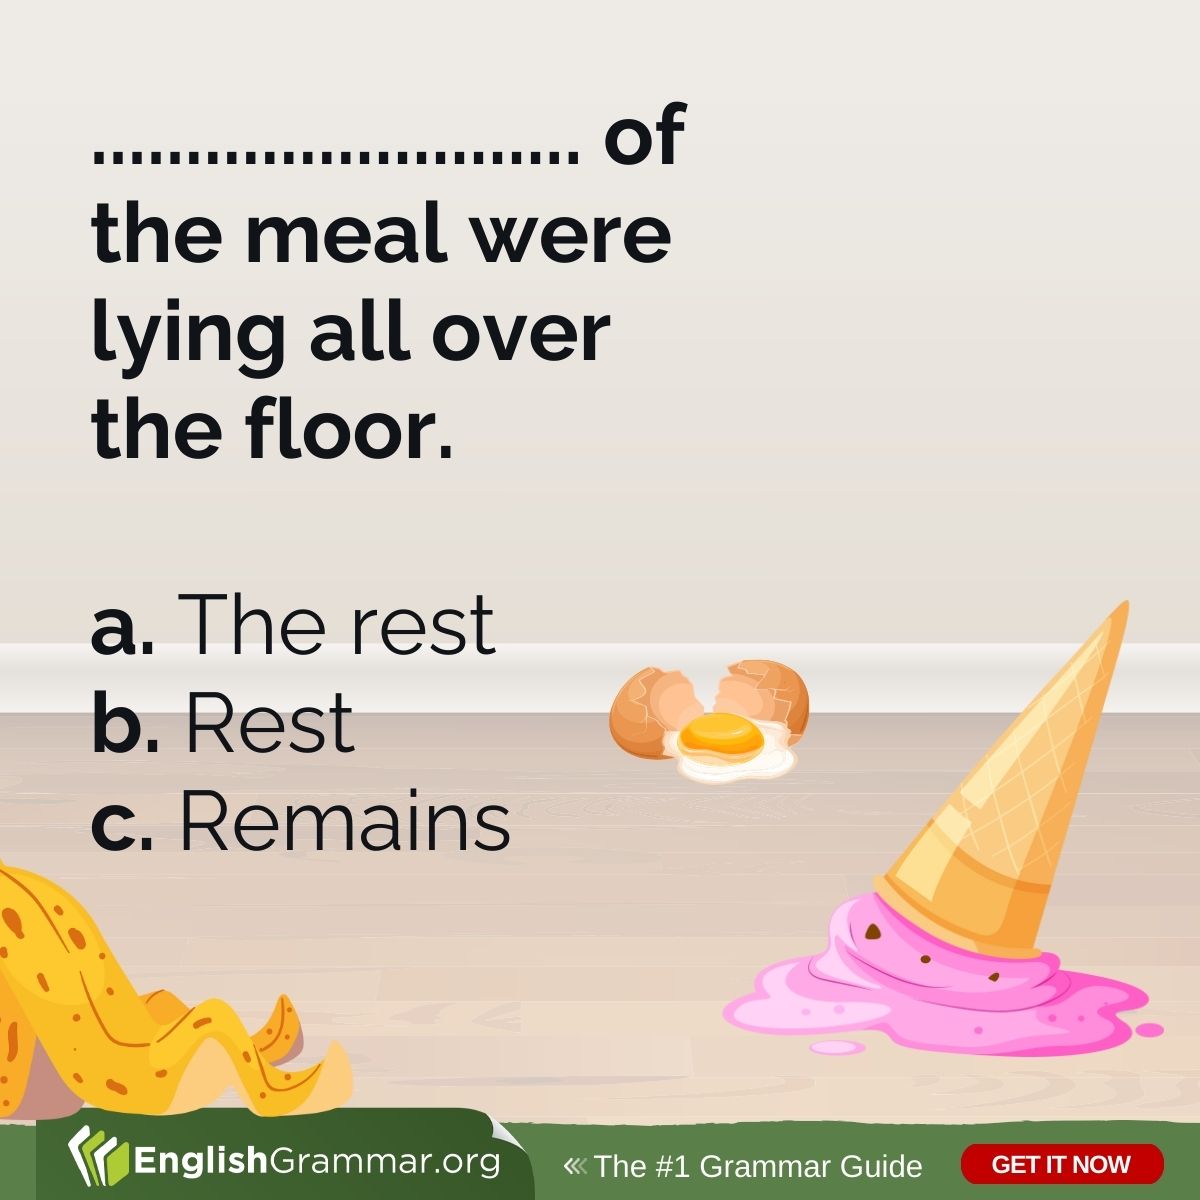 What do you think? Find the right answer here: englishgrammar.org/commonly-confu… #amwriting #writing #grammar